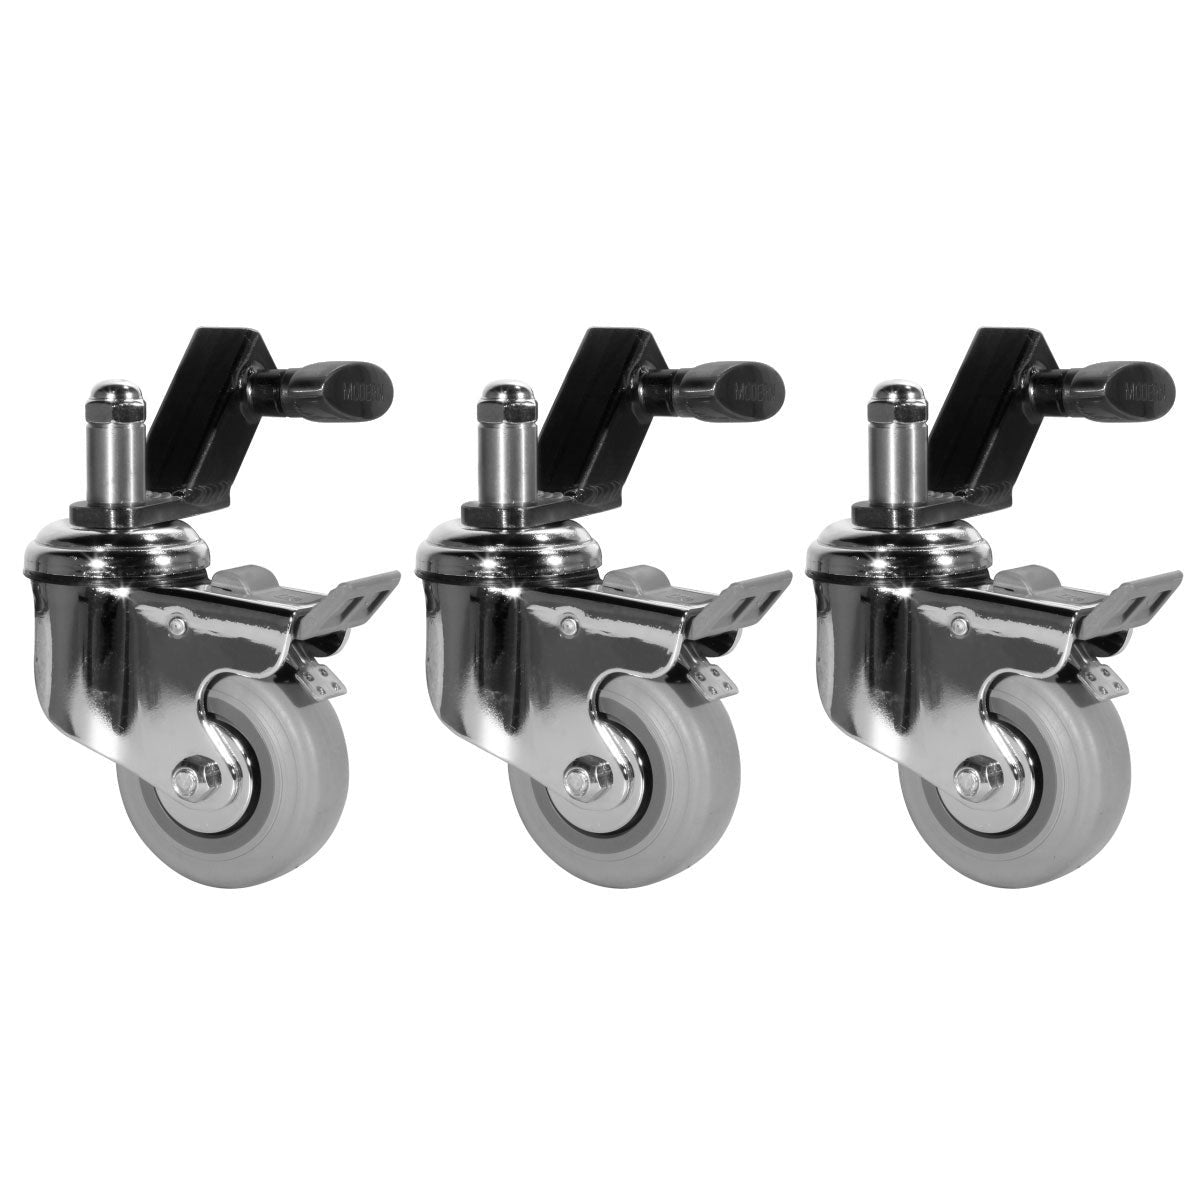 Wheels for Baby Stands (Set of 3 Wheels & Slip on Adapters)